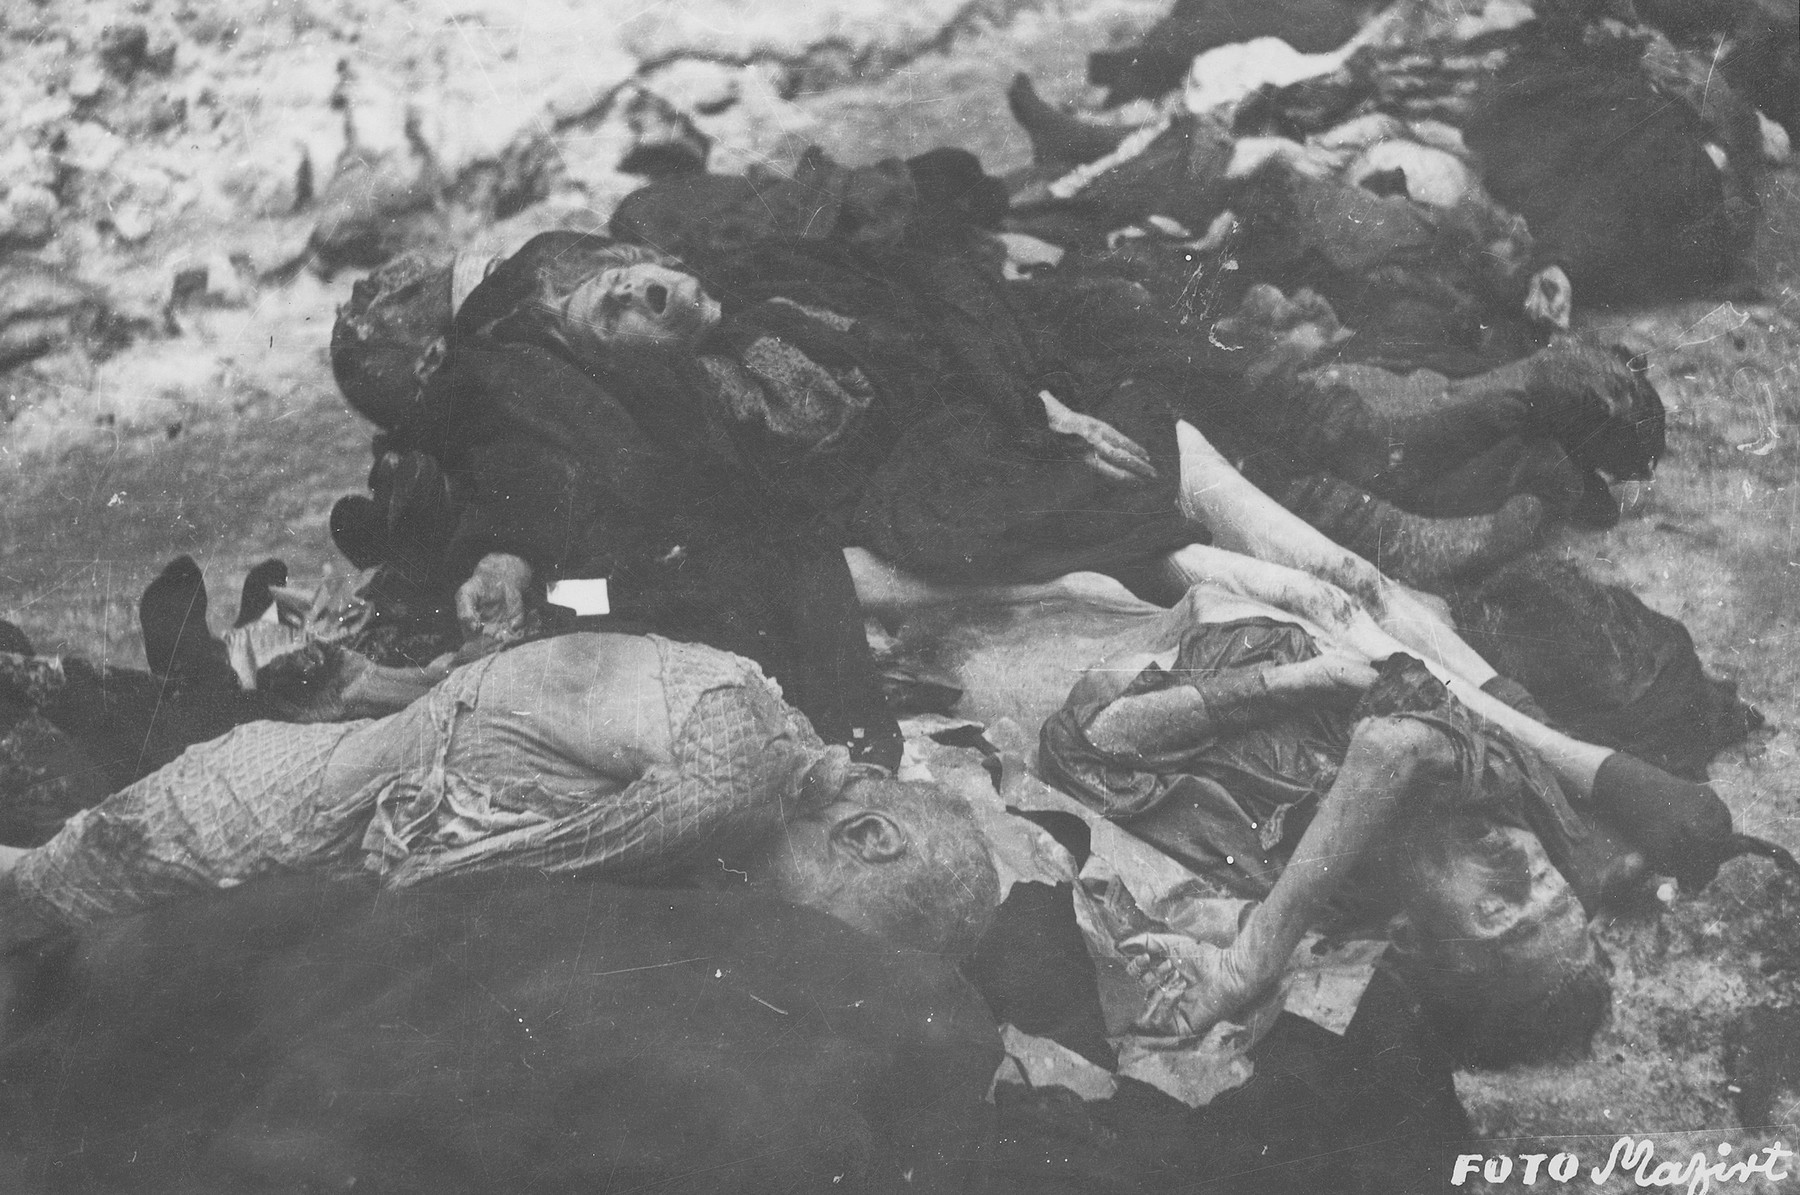 The corpses of Jews in the courtyard of the Dohany Street Synagogue.

During the last few months of the war in Hungary, the Nyilas (Arrow Cross) exploited the anarchic conditions in the areas still under their control to continue their excesses against the Jews.  This was particularly true in Budapest, despite the fact that the Soviet army had completely encircled the city by December 27, 1944.  The reign of terror that had begun with Szalaszi's assumption of power on October 15, 1944, went almost completely unchecked after the beginning of the Soviet siege on December 9.  Gangs of armed Nyilas--mostly teenagers--roamed the city hunting for Jews in hiding.  They searched them out in hospitals, shelters, homes outside the ghetto, in the International Ghetto, and in the large ghetto.  After robbing the Jews of their remaining valuables, the Nyilas shot them on the spot or marched them to the banks of the Danube, where they shot them, and threw their bodies into the river.  A large number of Jews who were murdered in the ghetto were buried in mass graves in the courtyard of the Dohany Street Synagogue.

The most horrific of these attacks occurred on the Pest side of the capital, at the two Jewish hospitals located on Maros and Varosmajor streets.  The Maros Street hospital, which had operated under the protection of the International Red Cross during the German occupation, was attacked on January 11, 1945.  After the initial melee, during which Nyilas gang members wantonly destroyed hospital equipment, threw patients out of their beds and trampled them, and murdered staff members, survivors were ordered to dig a mass grave, remove and bury the bodies.  They were then shot and buried in the grave themselves.  Only one nurse survived of the 92 people that were in the hospital at the time.  Three days later, on January 14, the hospital on Varosmajor Street was attacked, resulting in the deaths of 150 patients and medical staff.  These manhunts and massacres continued unabated until the liberation of Budapest in April.  [R. Braham, "The Politics of Genocide," vol. 2: 995-1007]